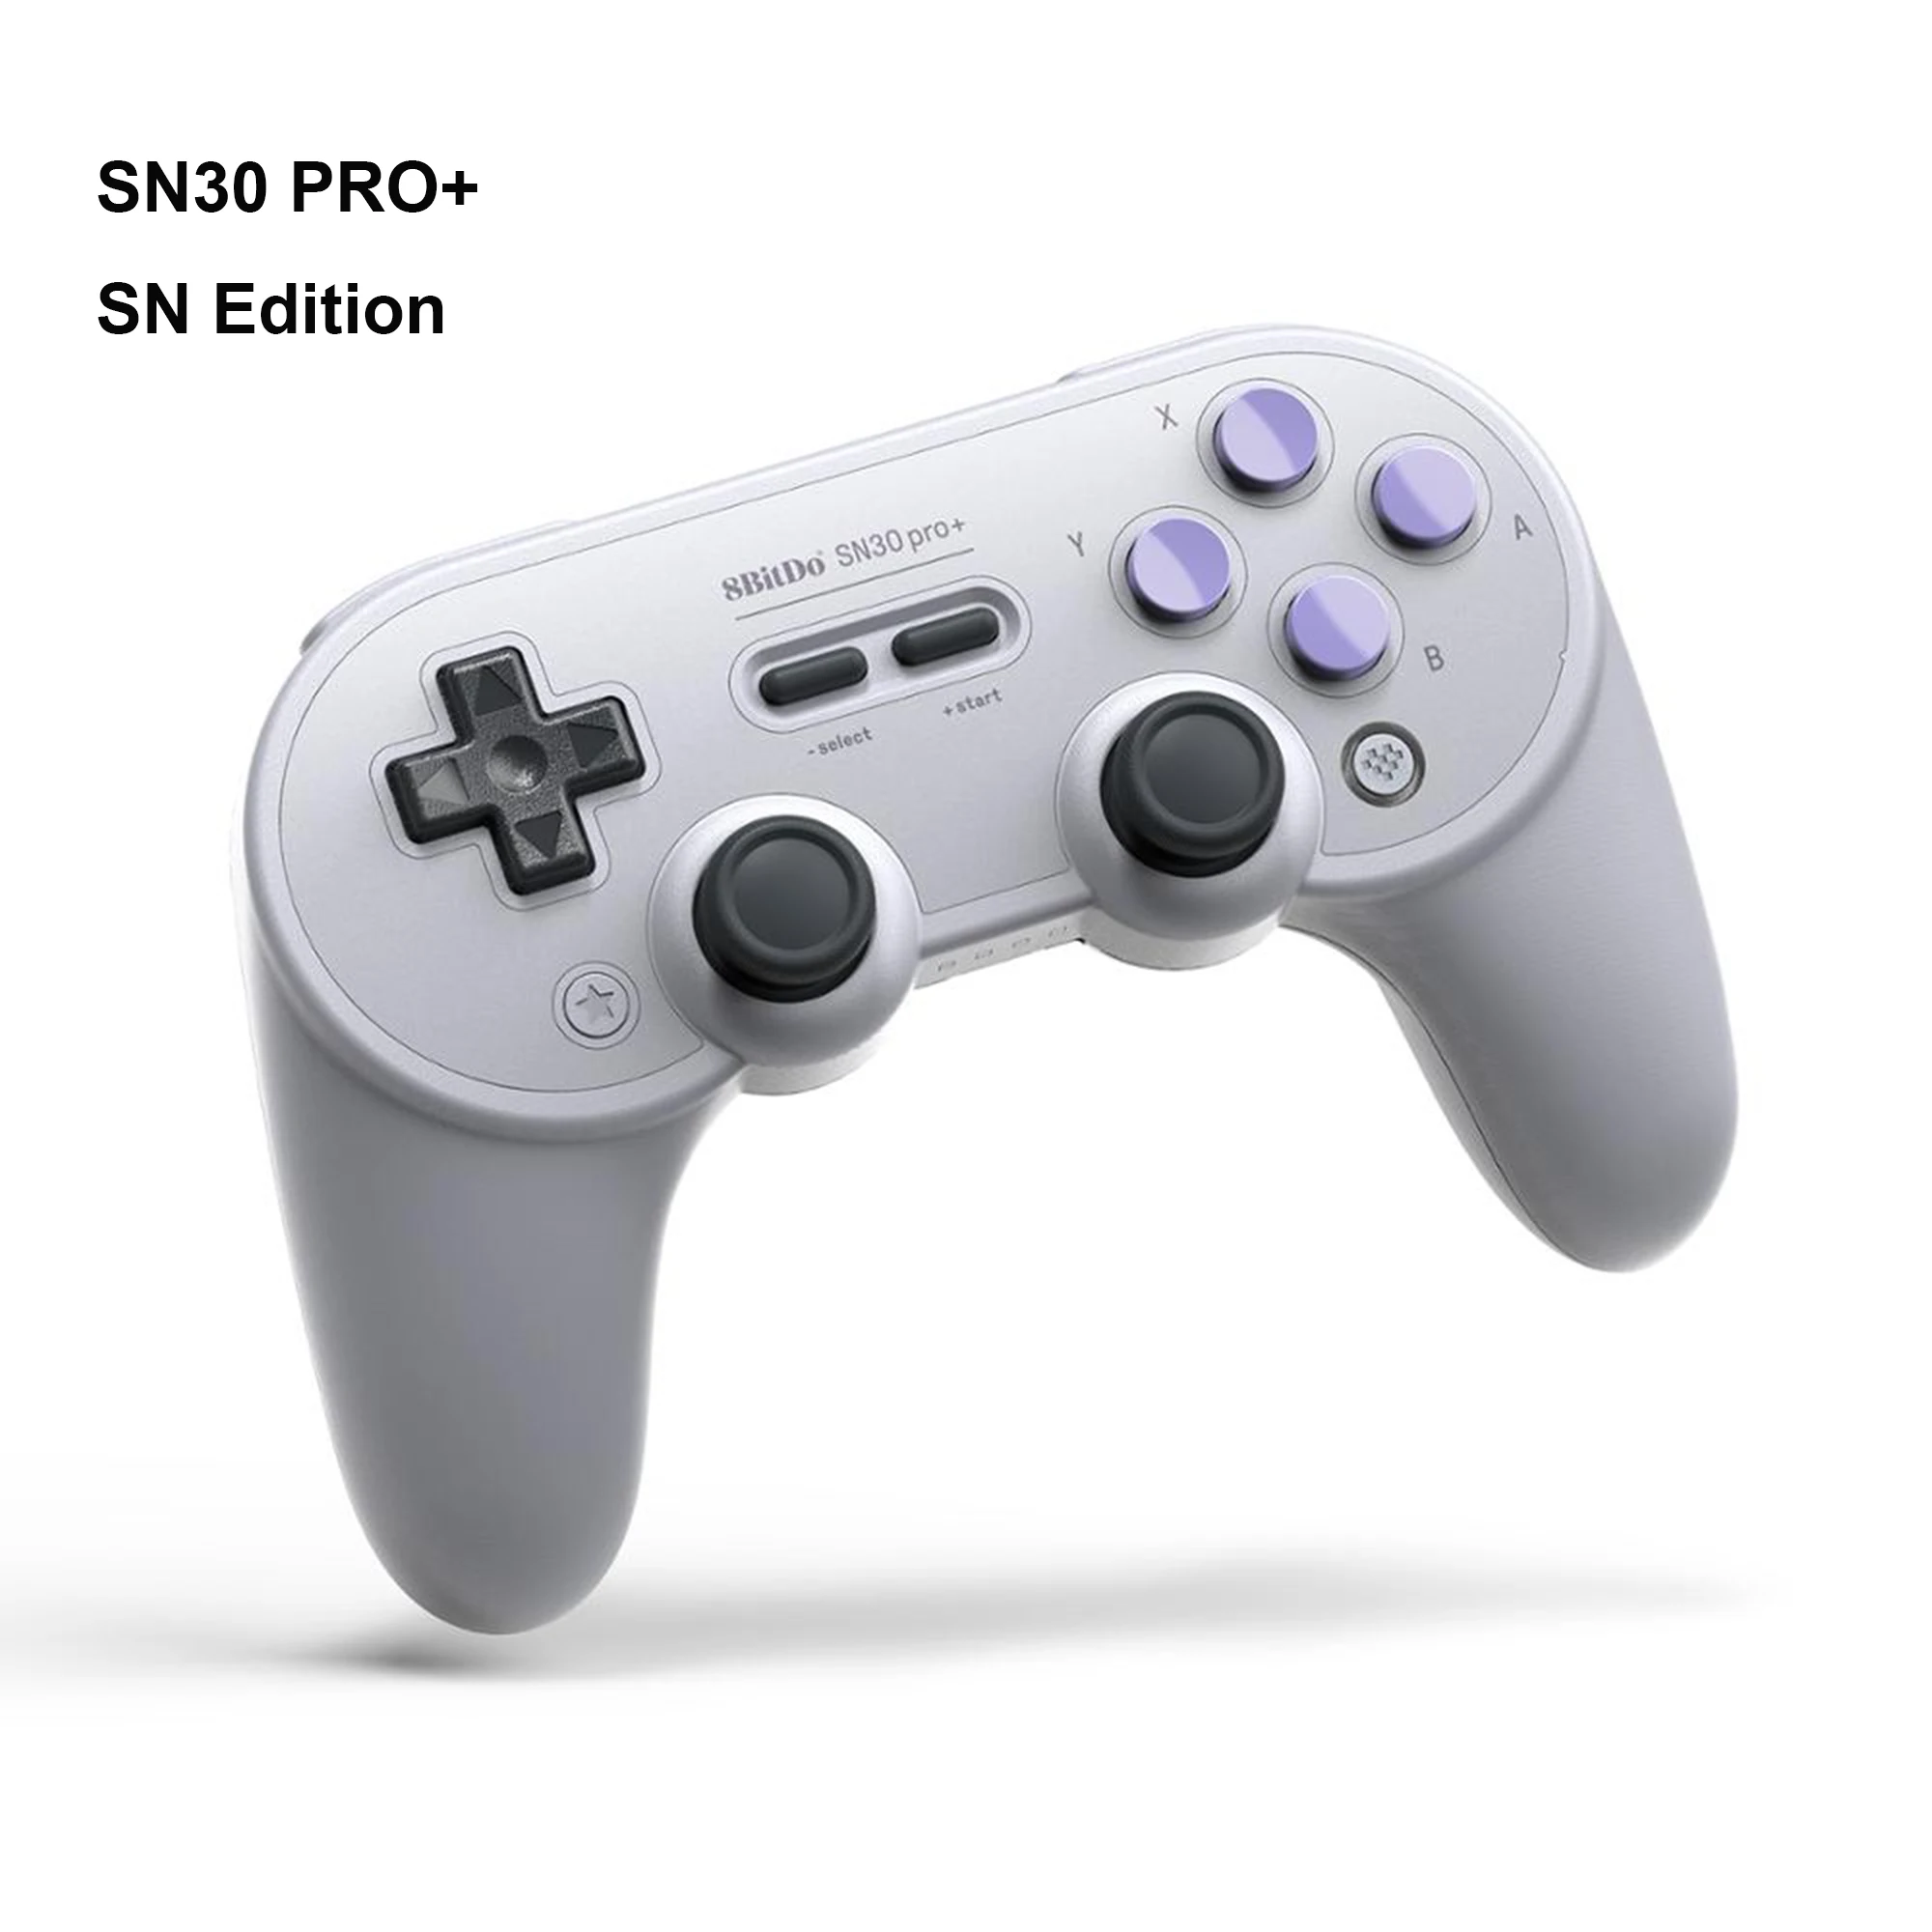 8Bitdo Pro 2 SN30 Pro+ SN30 Pro SF30 Pro Bluetooth Wireless Gamepad Controller for Windows Android macOS Nintendo Switch Steam images - 6